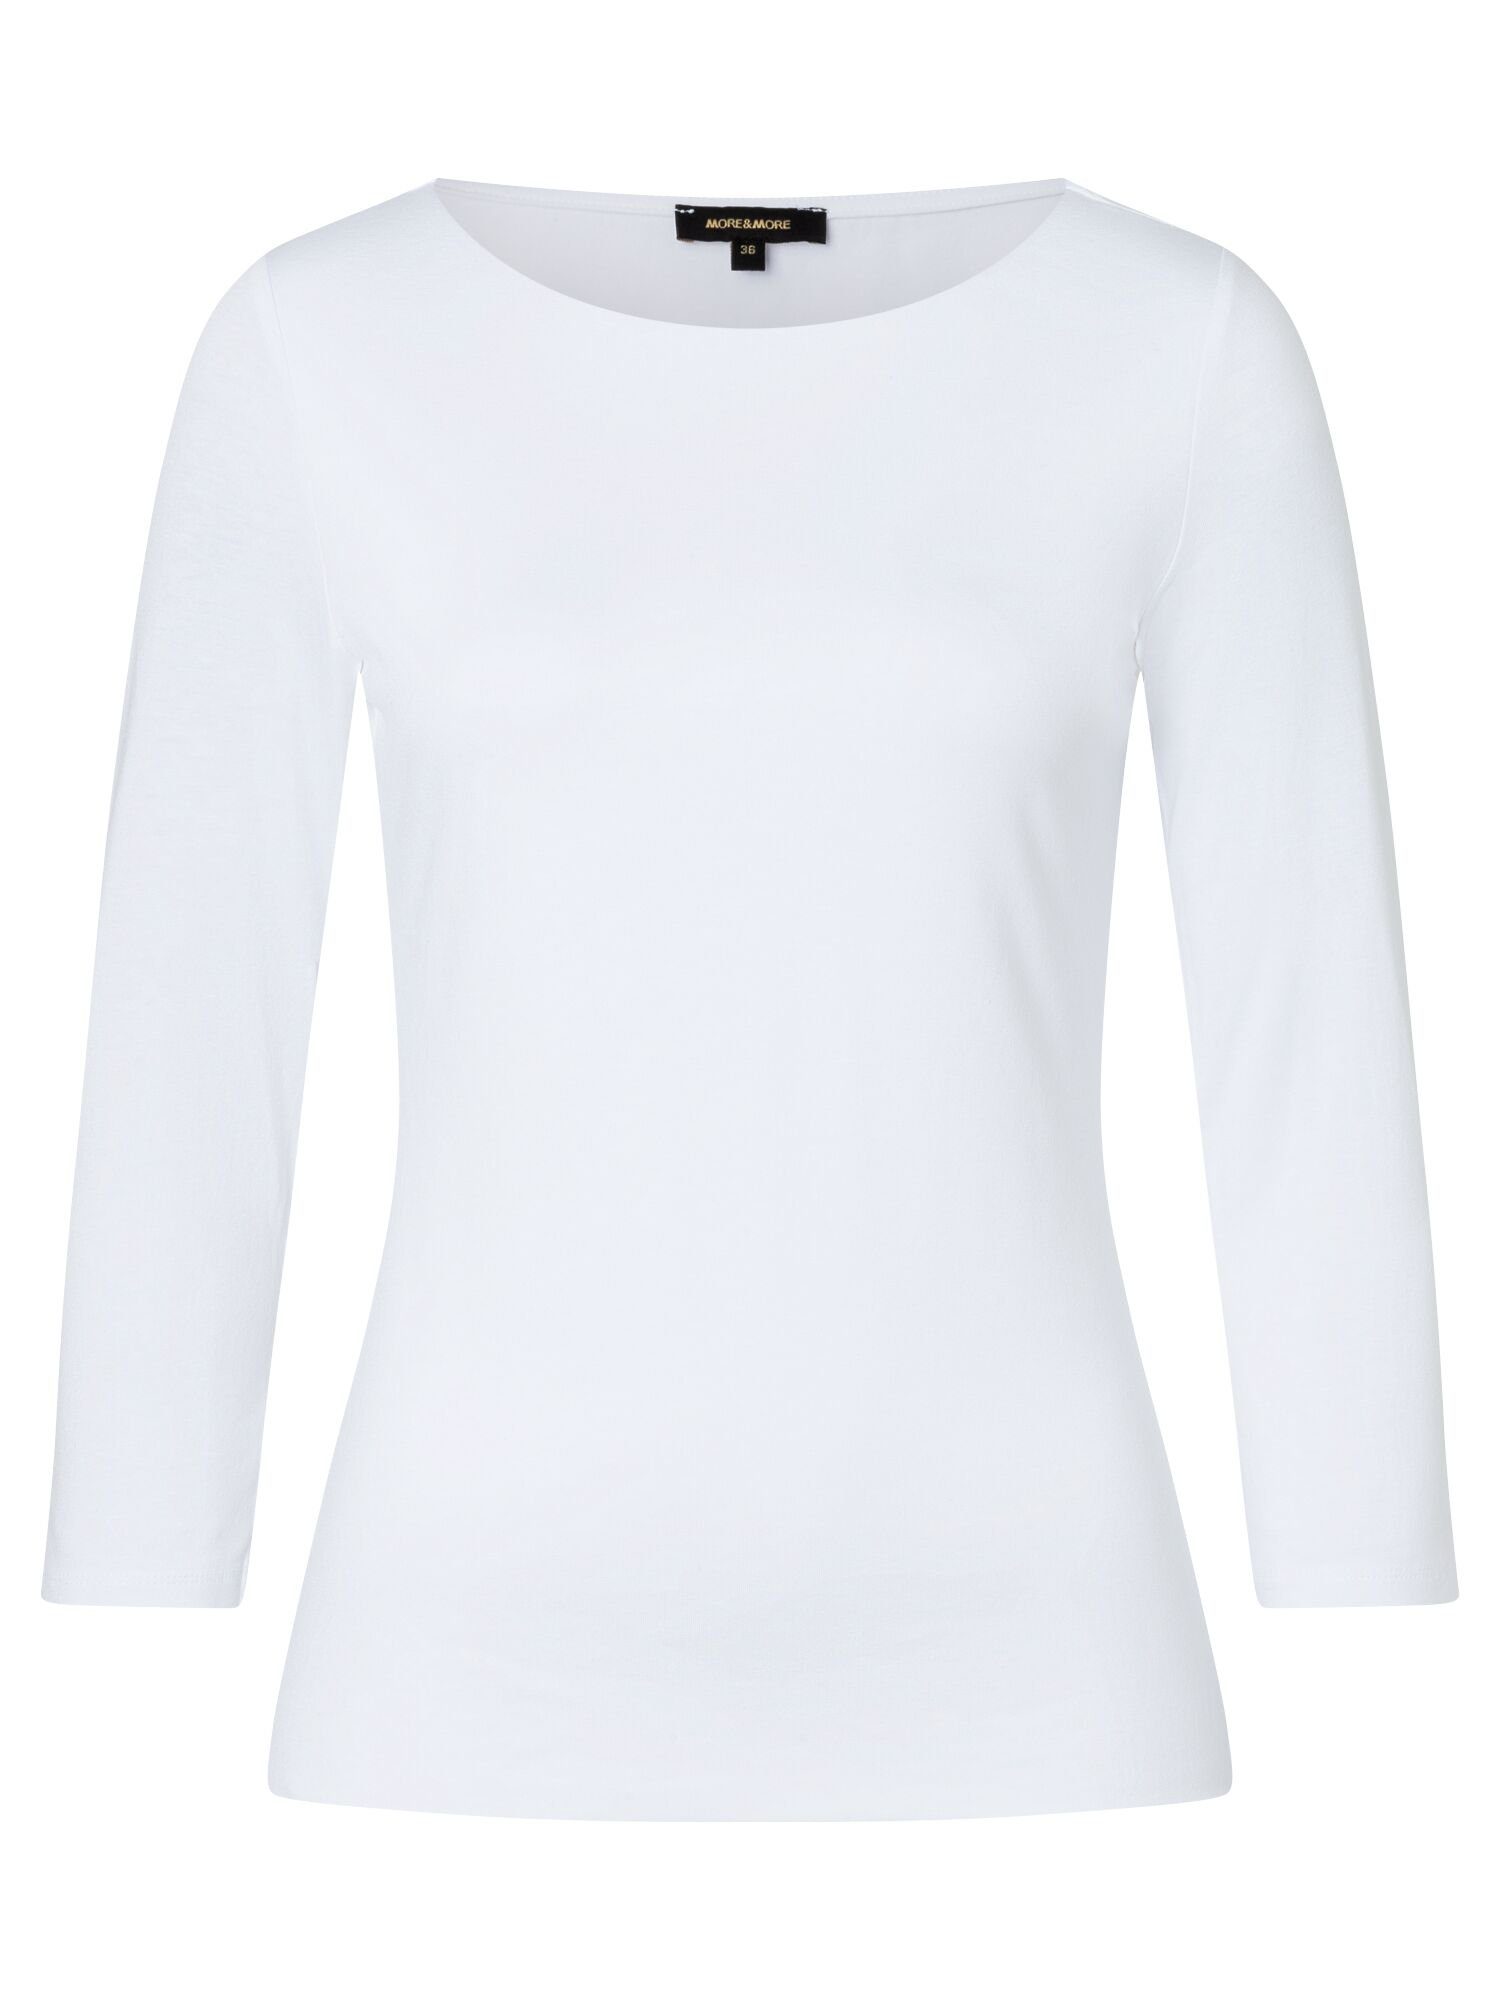 MORE&MORE weiss 3/4-Arm-Shirt